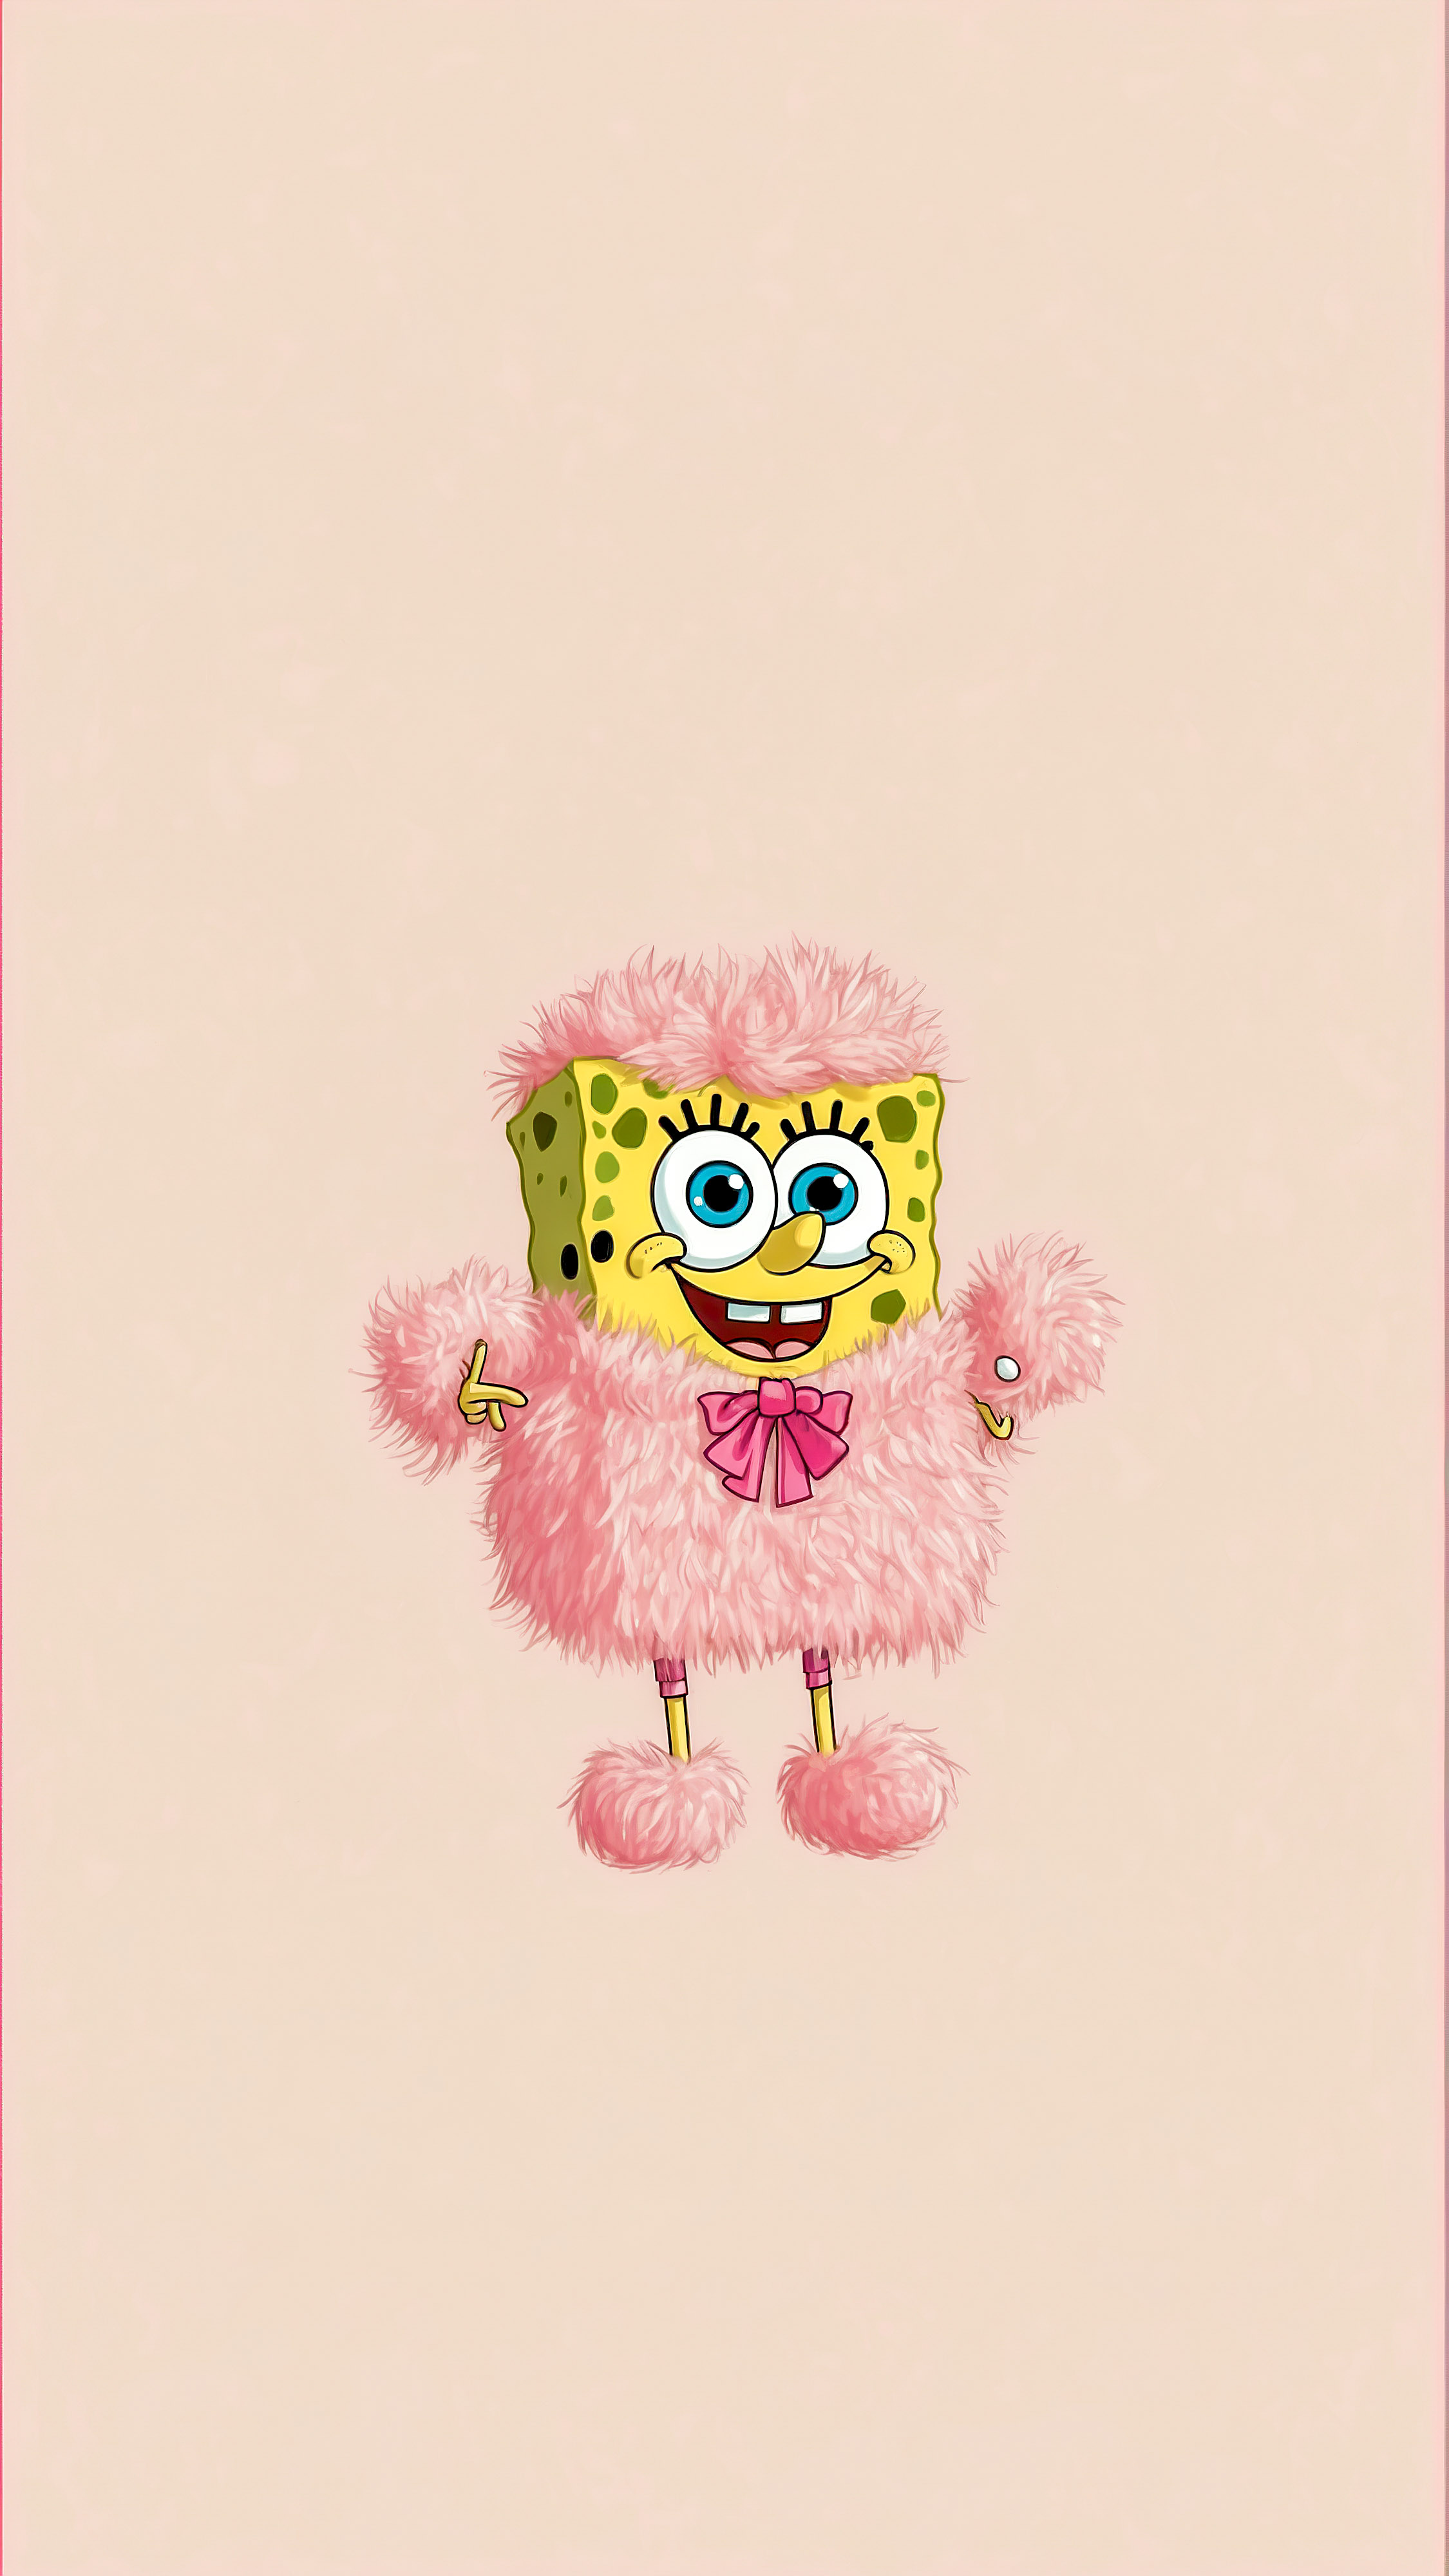 Get lost in the magic of our cute cartoon wallpaper for iPhone, showcasing SpongeBob SquarePants adorned with a fluffy pink boa and expressing surprise.